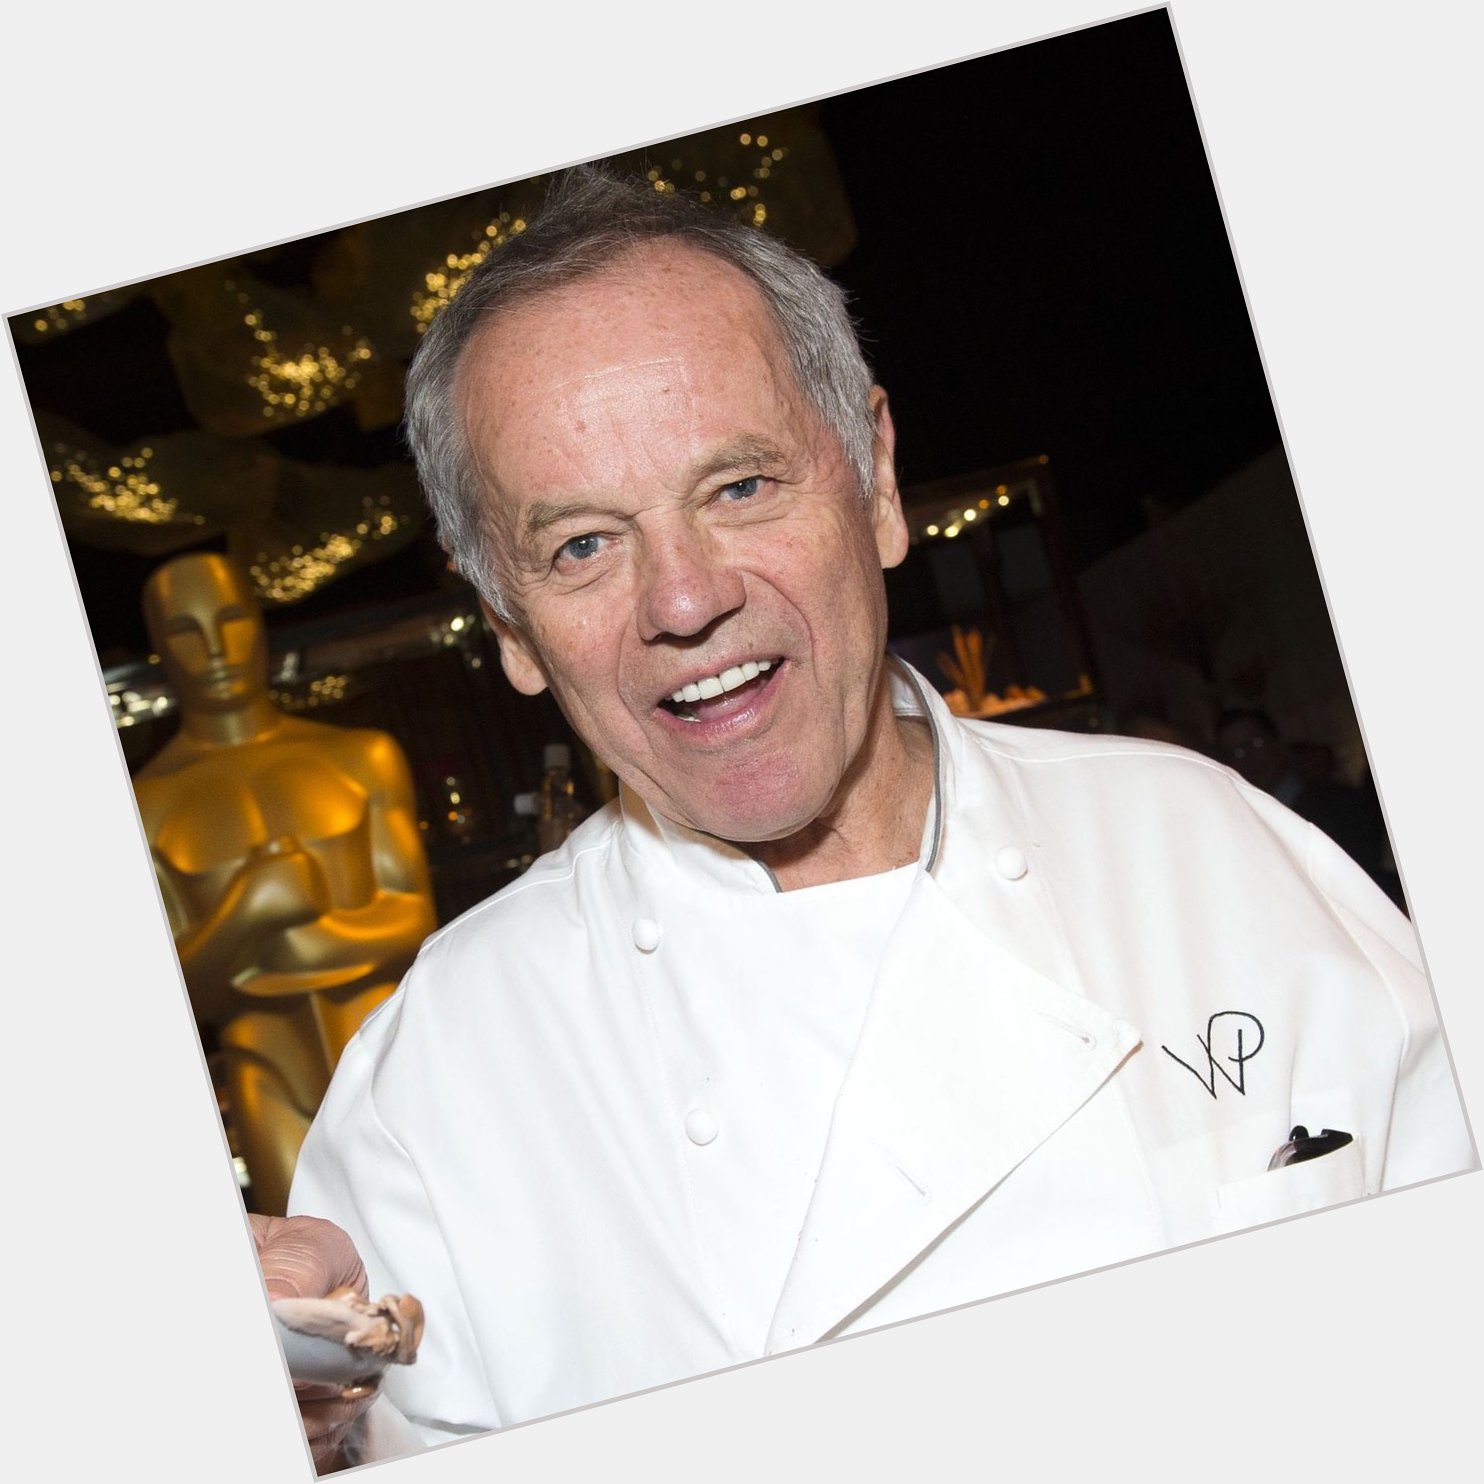 Happy Birthday Wolfgang Puck from your friends at the     